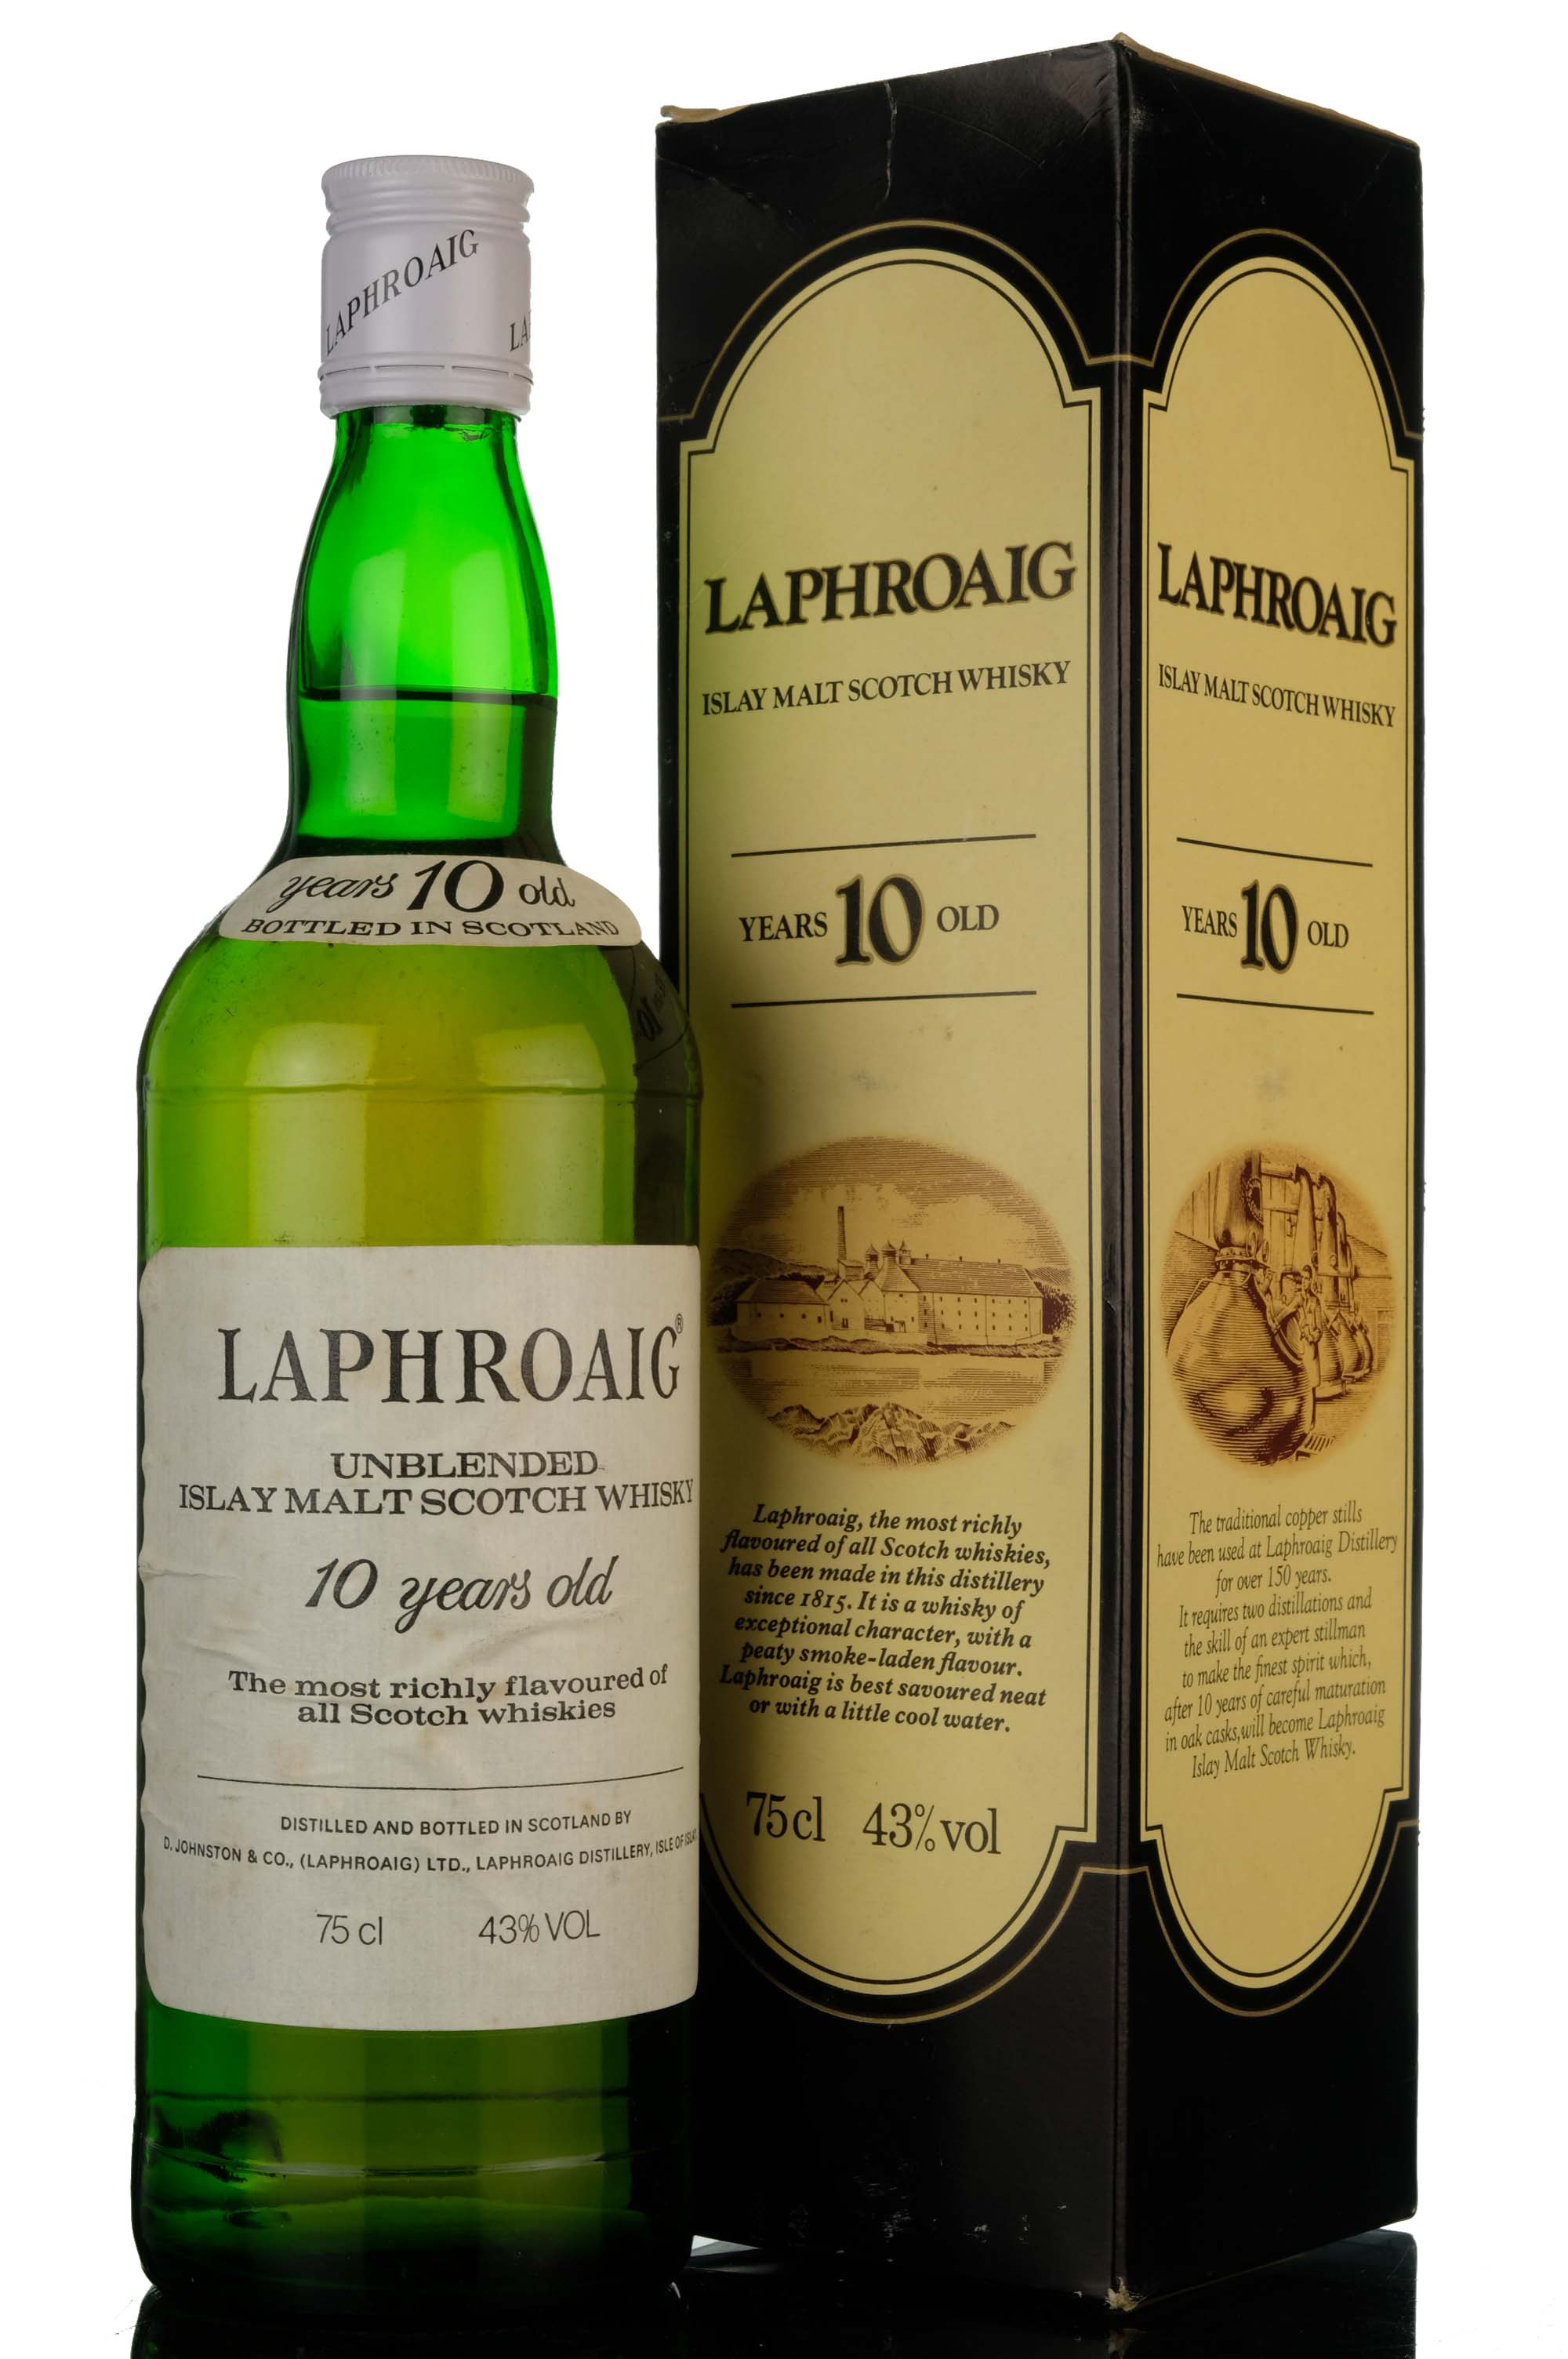 Laphroaig 10 Year Old - Unblended - 1981 Release